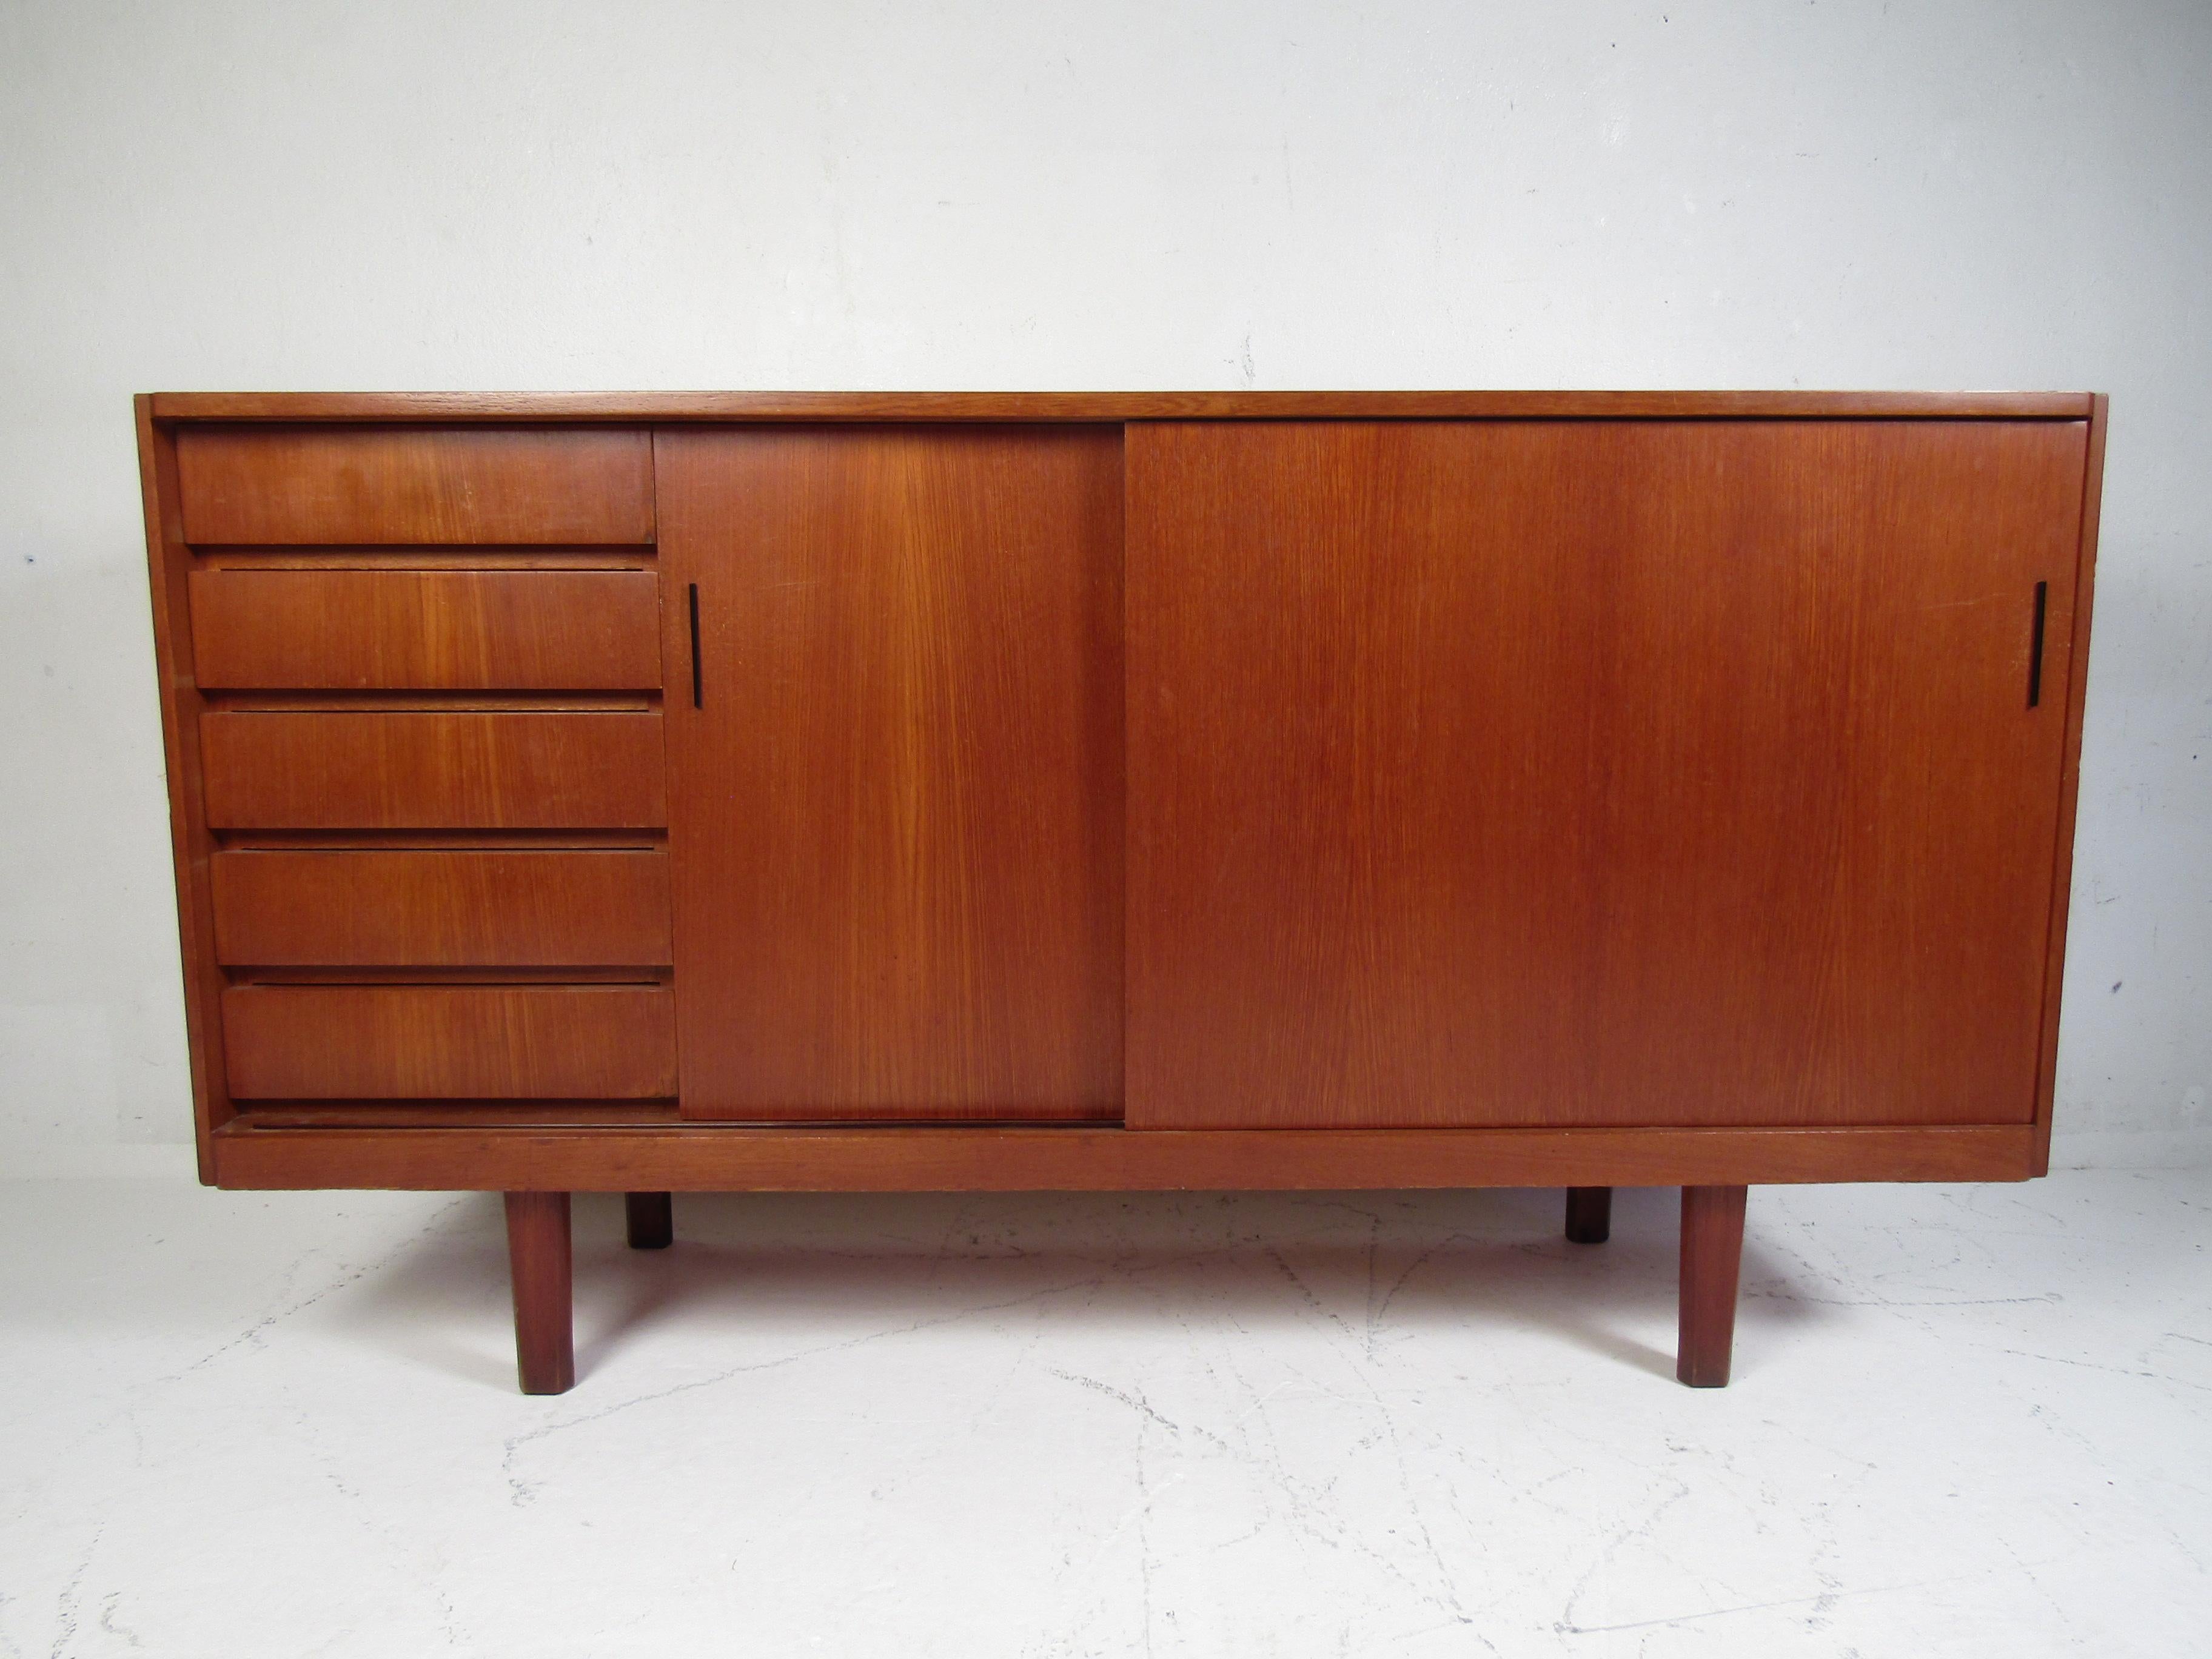 Stylish midcentury teak credenza. Pair of sliding doors which conceal storage space with adjustable shelving. Five dovetail jointed drawers. Great addition to any modern interior. Please confirm item location with dealer (NJ or NY).